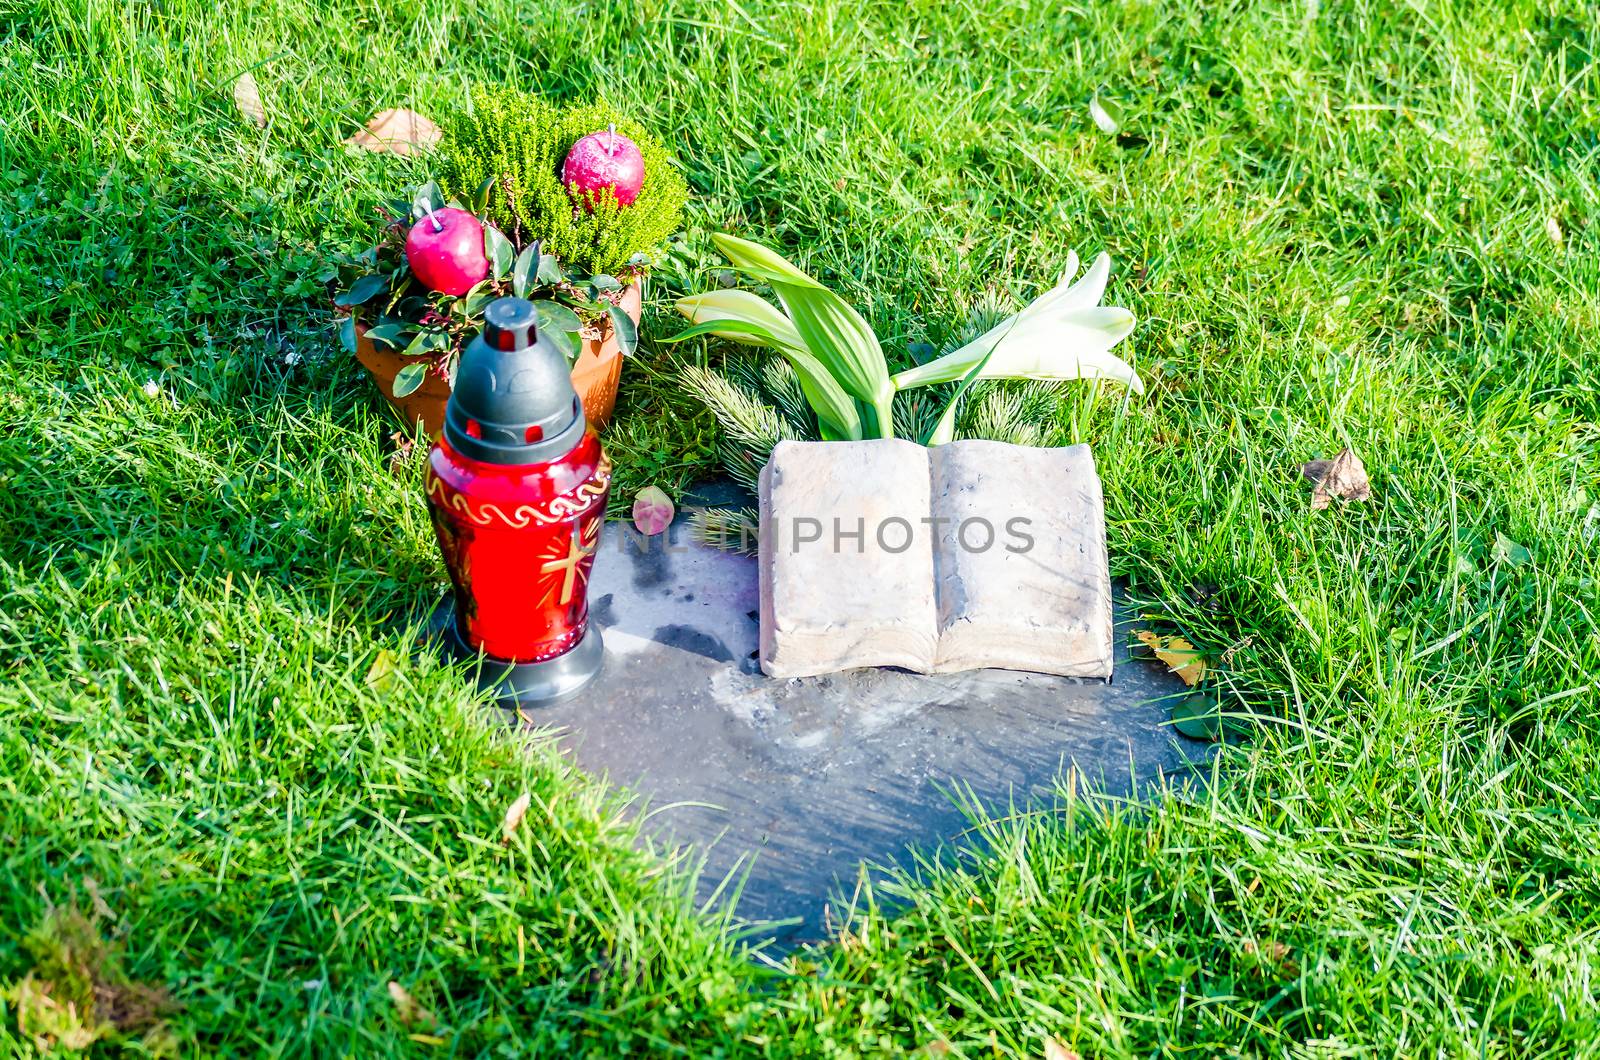 View of a lawn grave memorial stone with a cemetery with flowers.